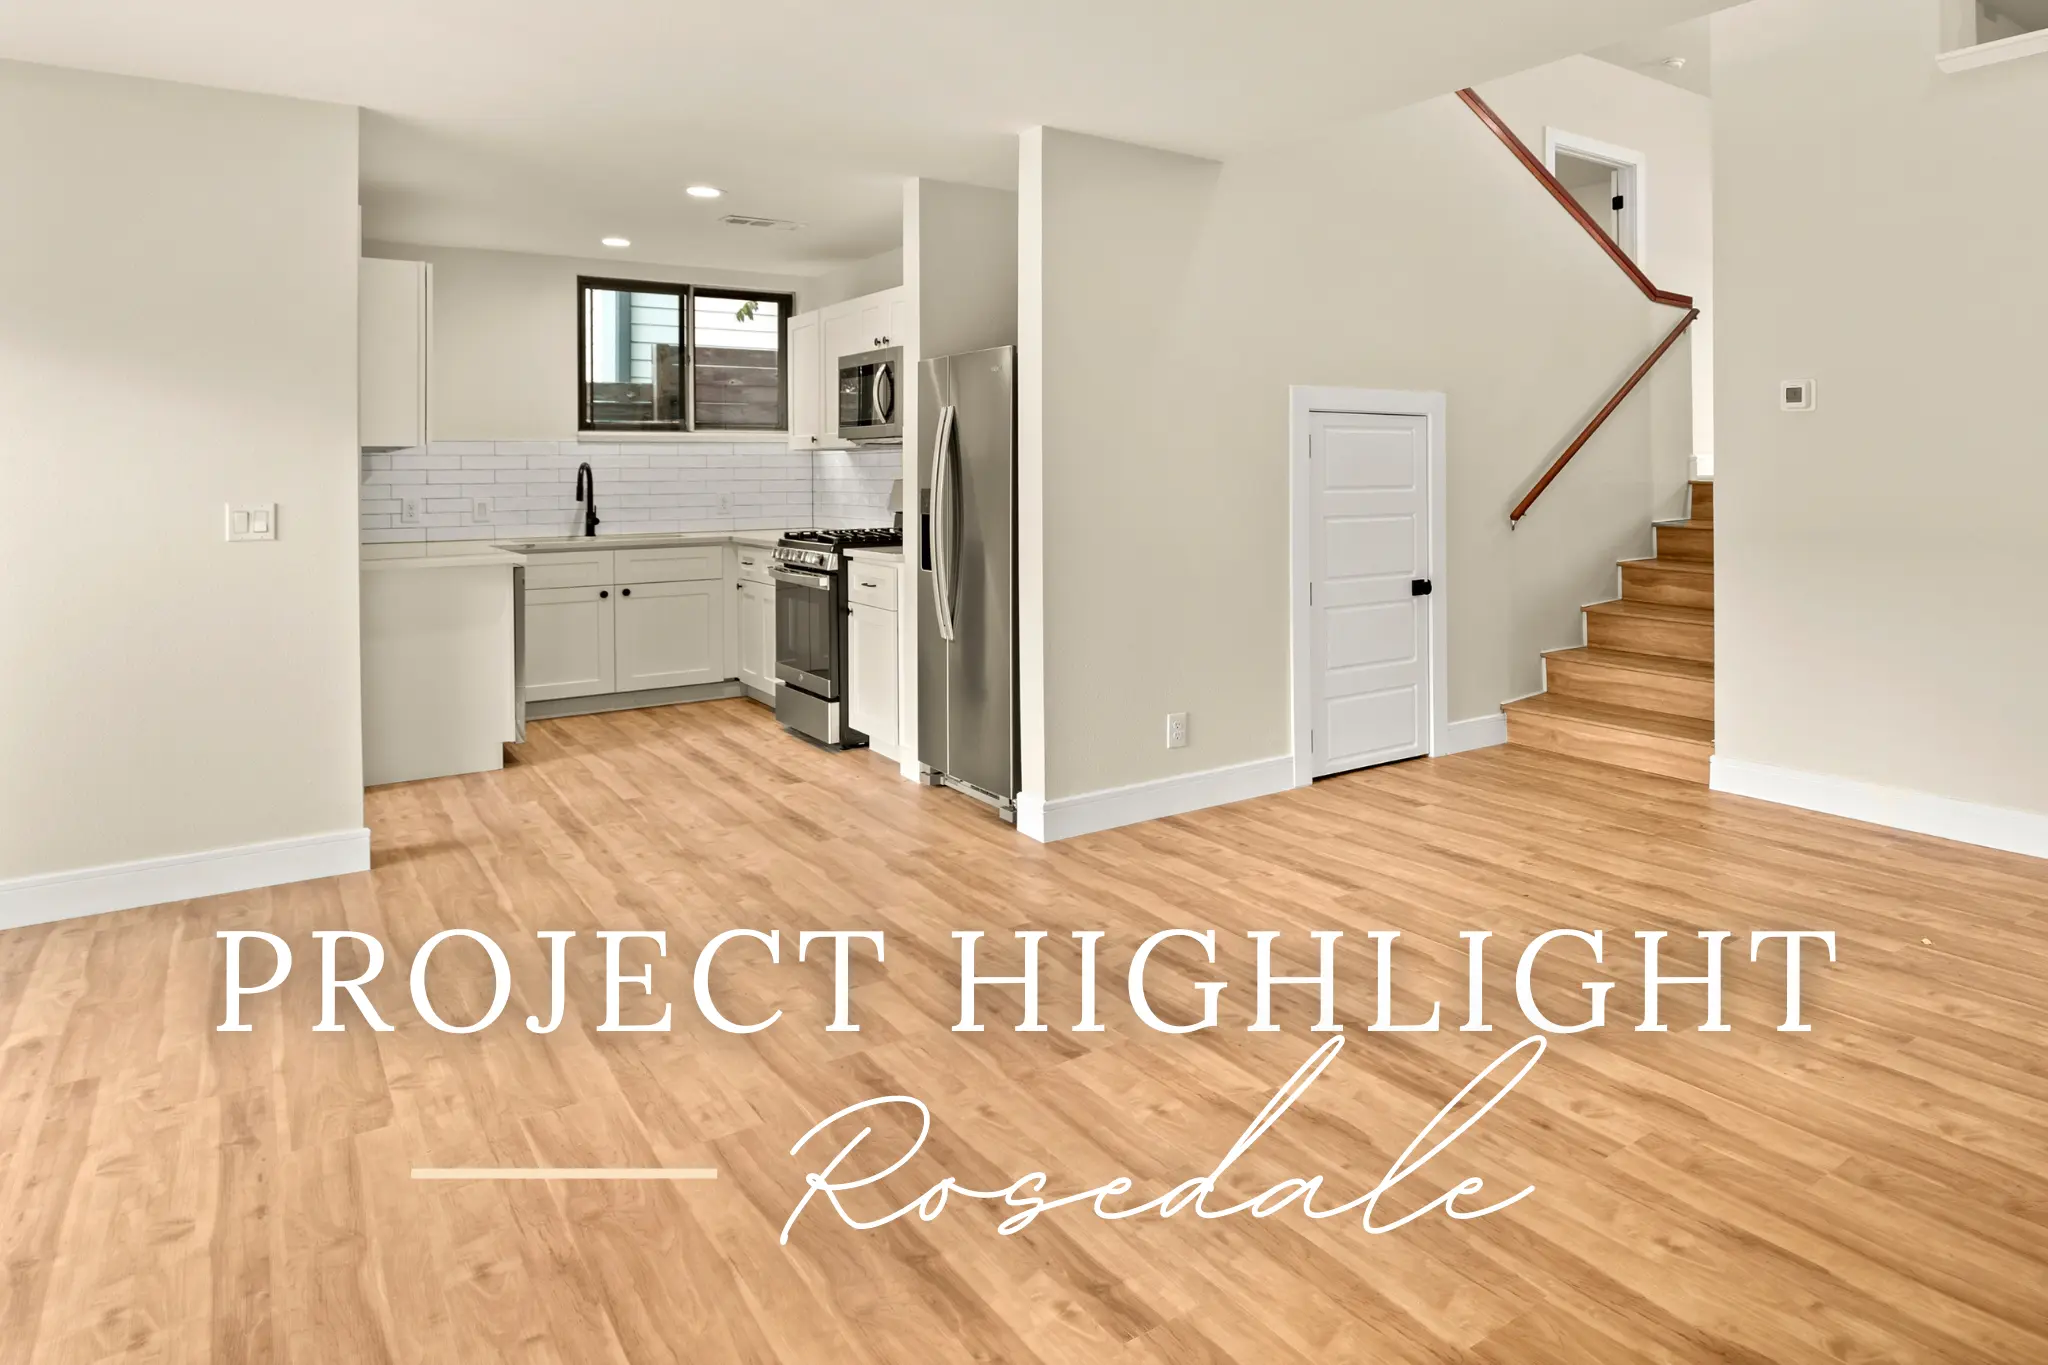 The interior of a custom home in the Rosedale neighborhood in Austin, with the text "Project Highlight: Rosedale" overlaid.